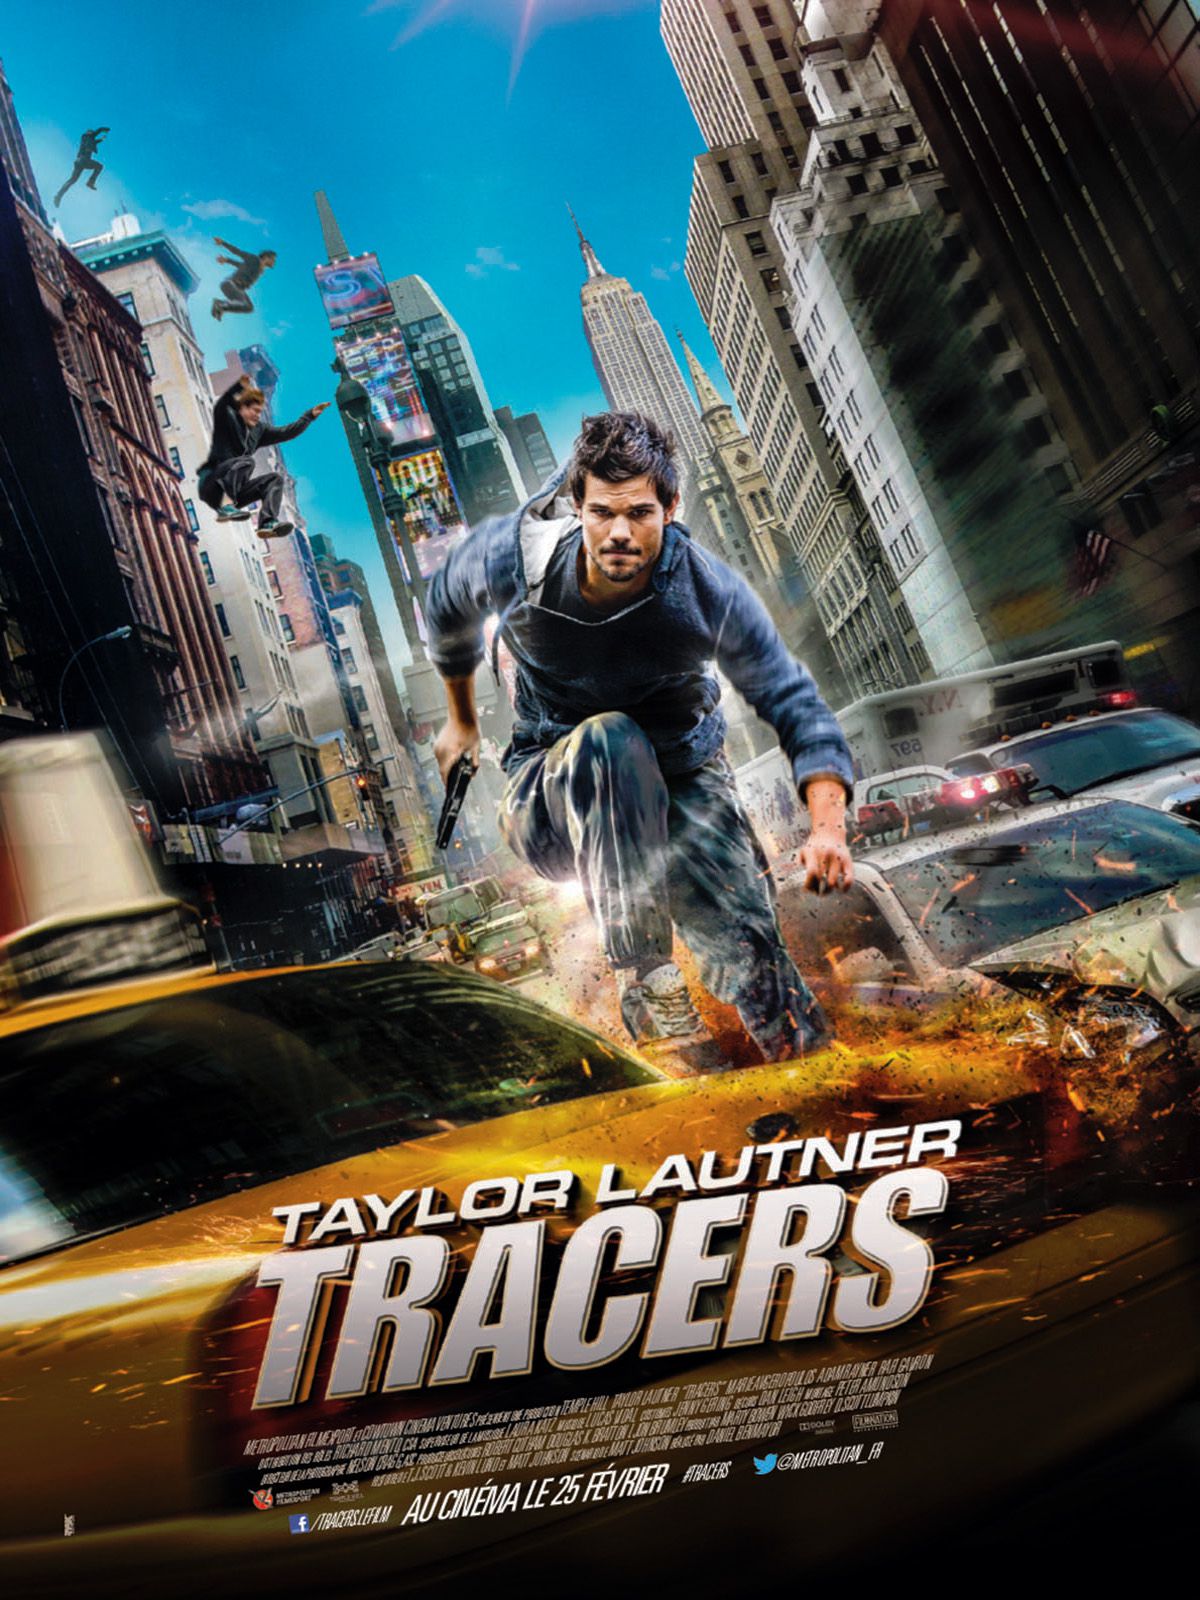 Tracers - Film (2015) streaming VF gratuit complet